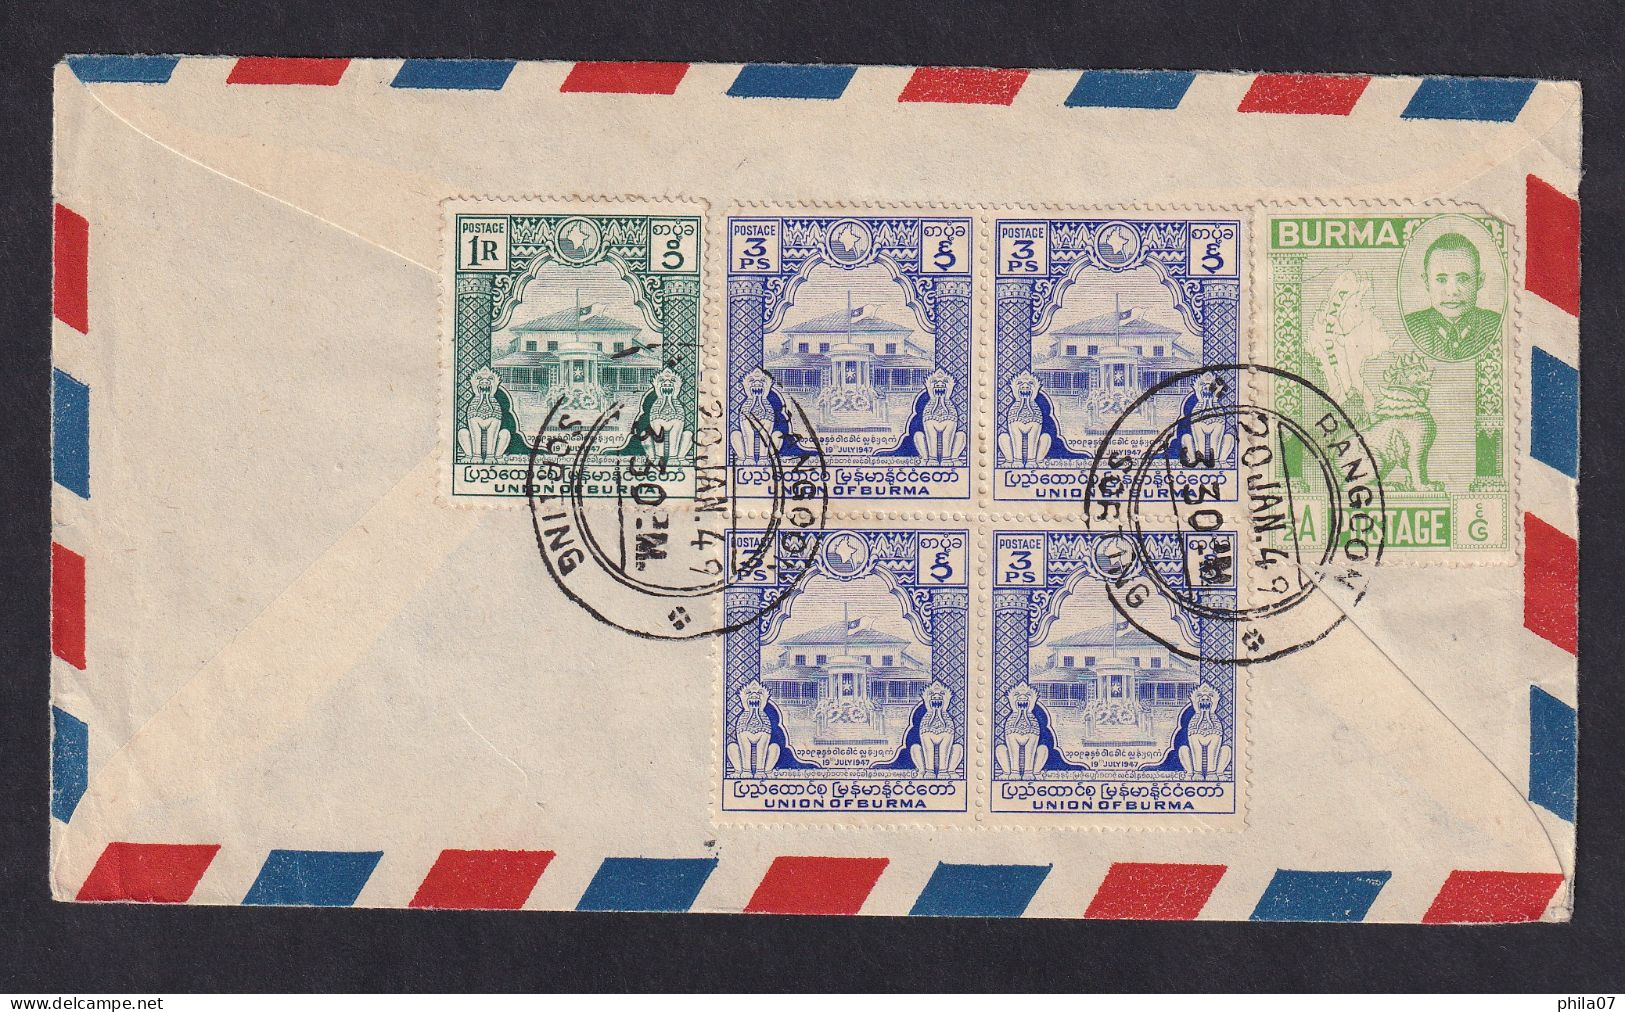 BURMA - Envelope Sent Via Air Mail From Rangoon To USA 1949, Nice Mass Franking On The Back / 2 Scans - Andere-Azië